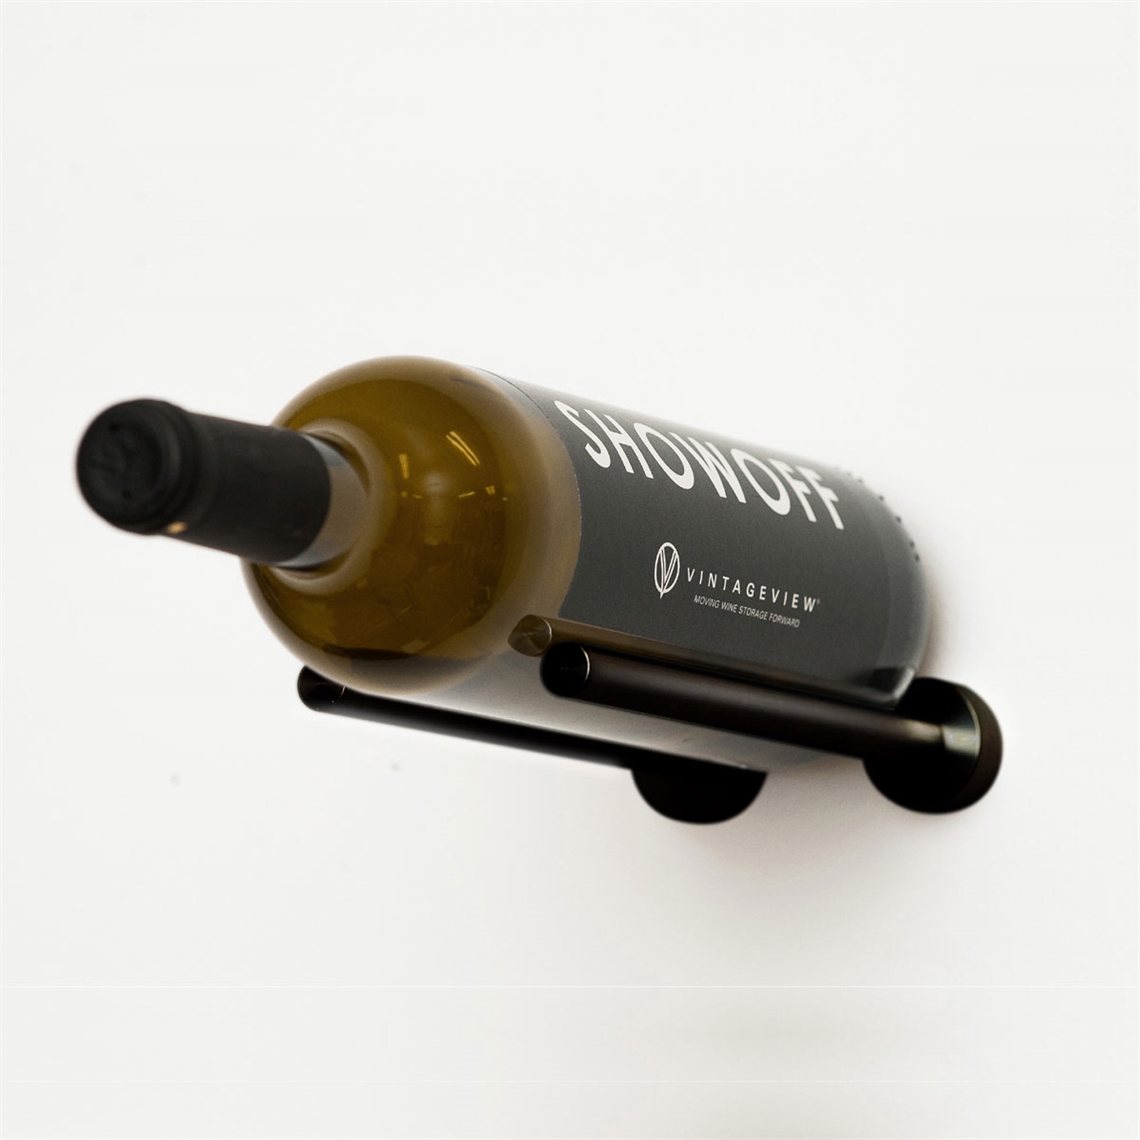 View more countertop wine rack buying guide from our Wall Mounted Wine Racks range